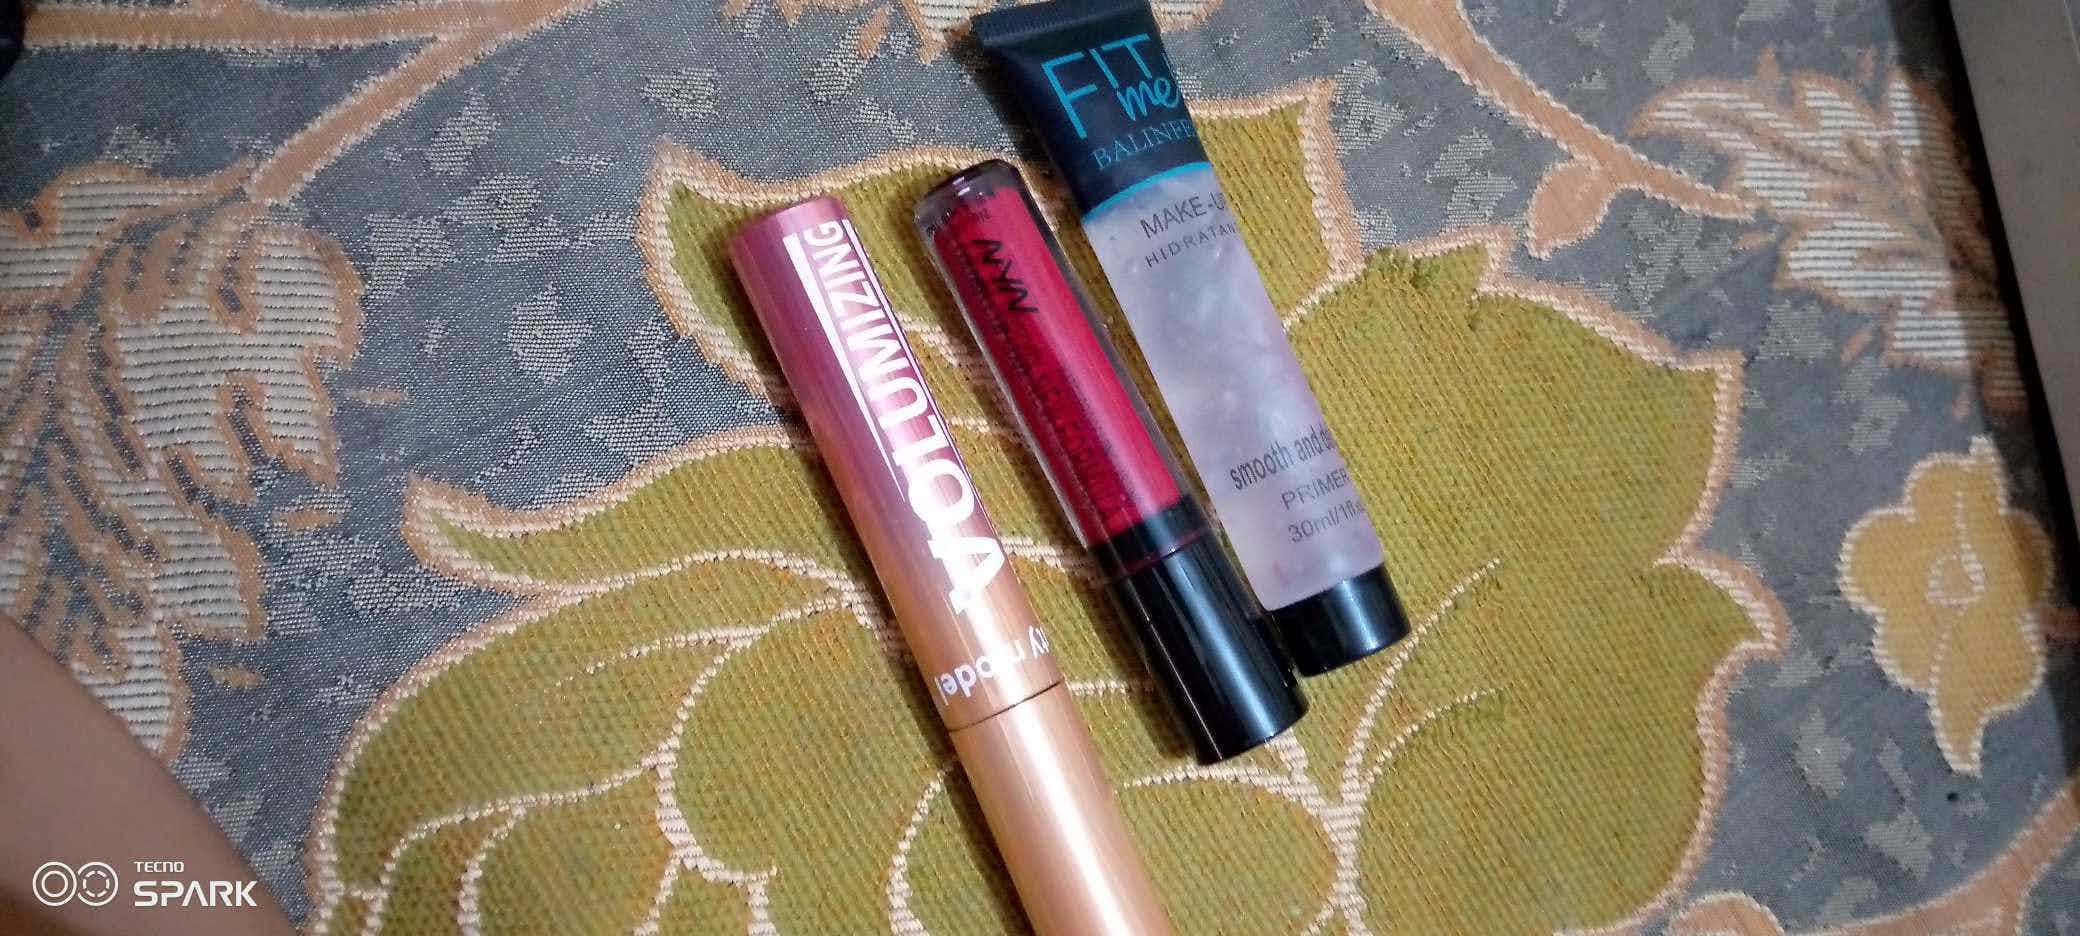 Makeup 💄 lovers join me hurry up 